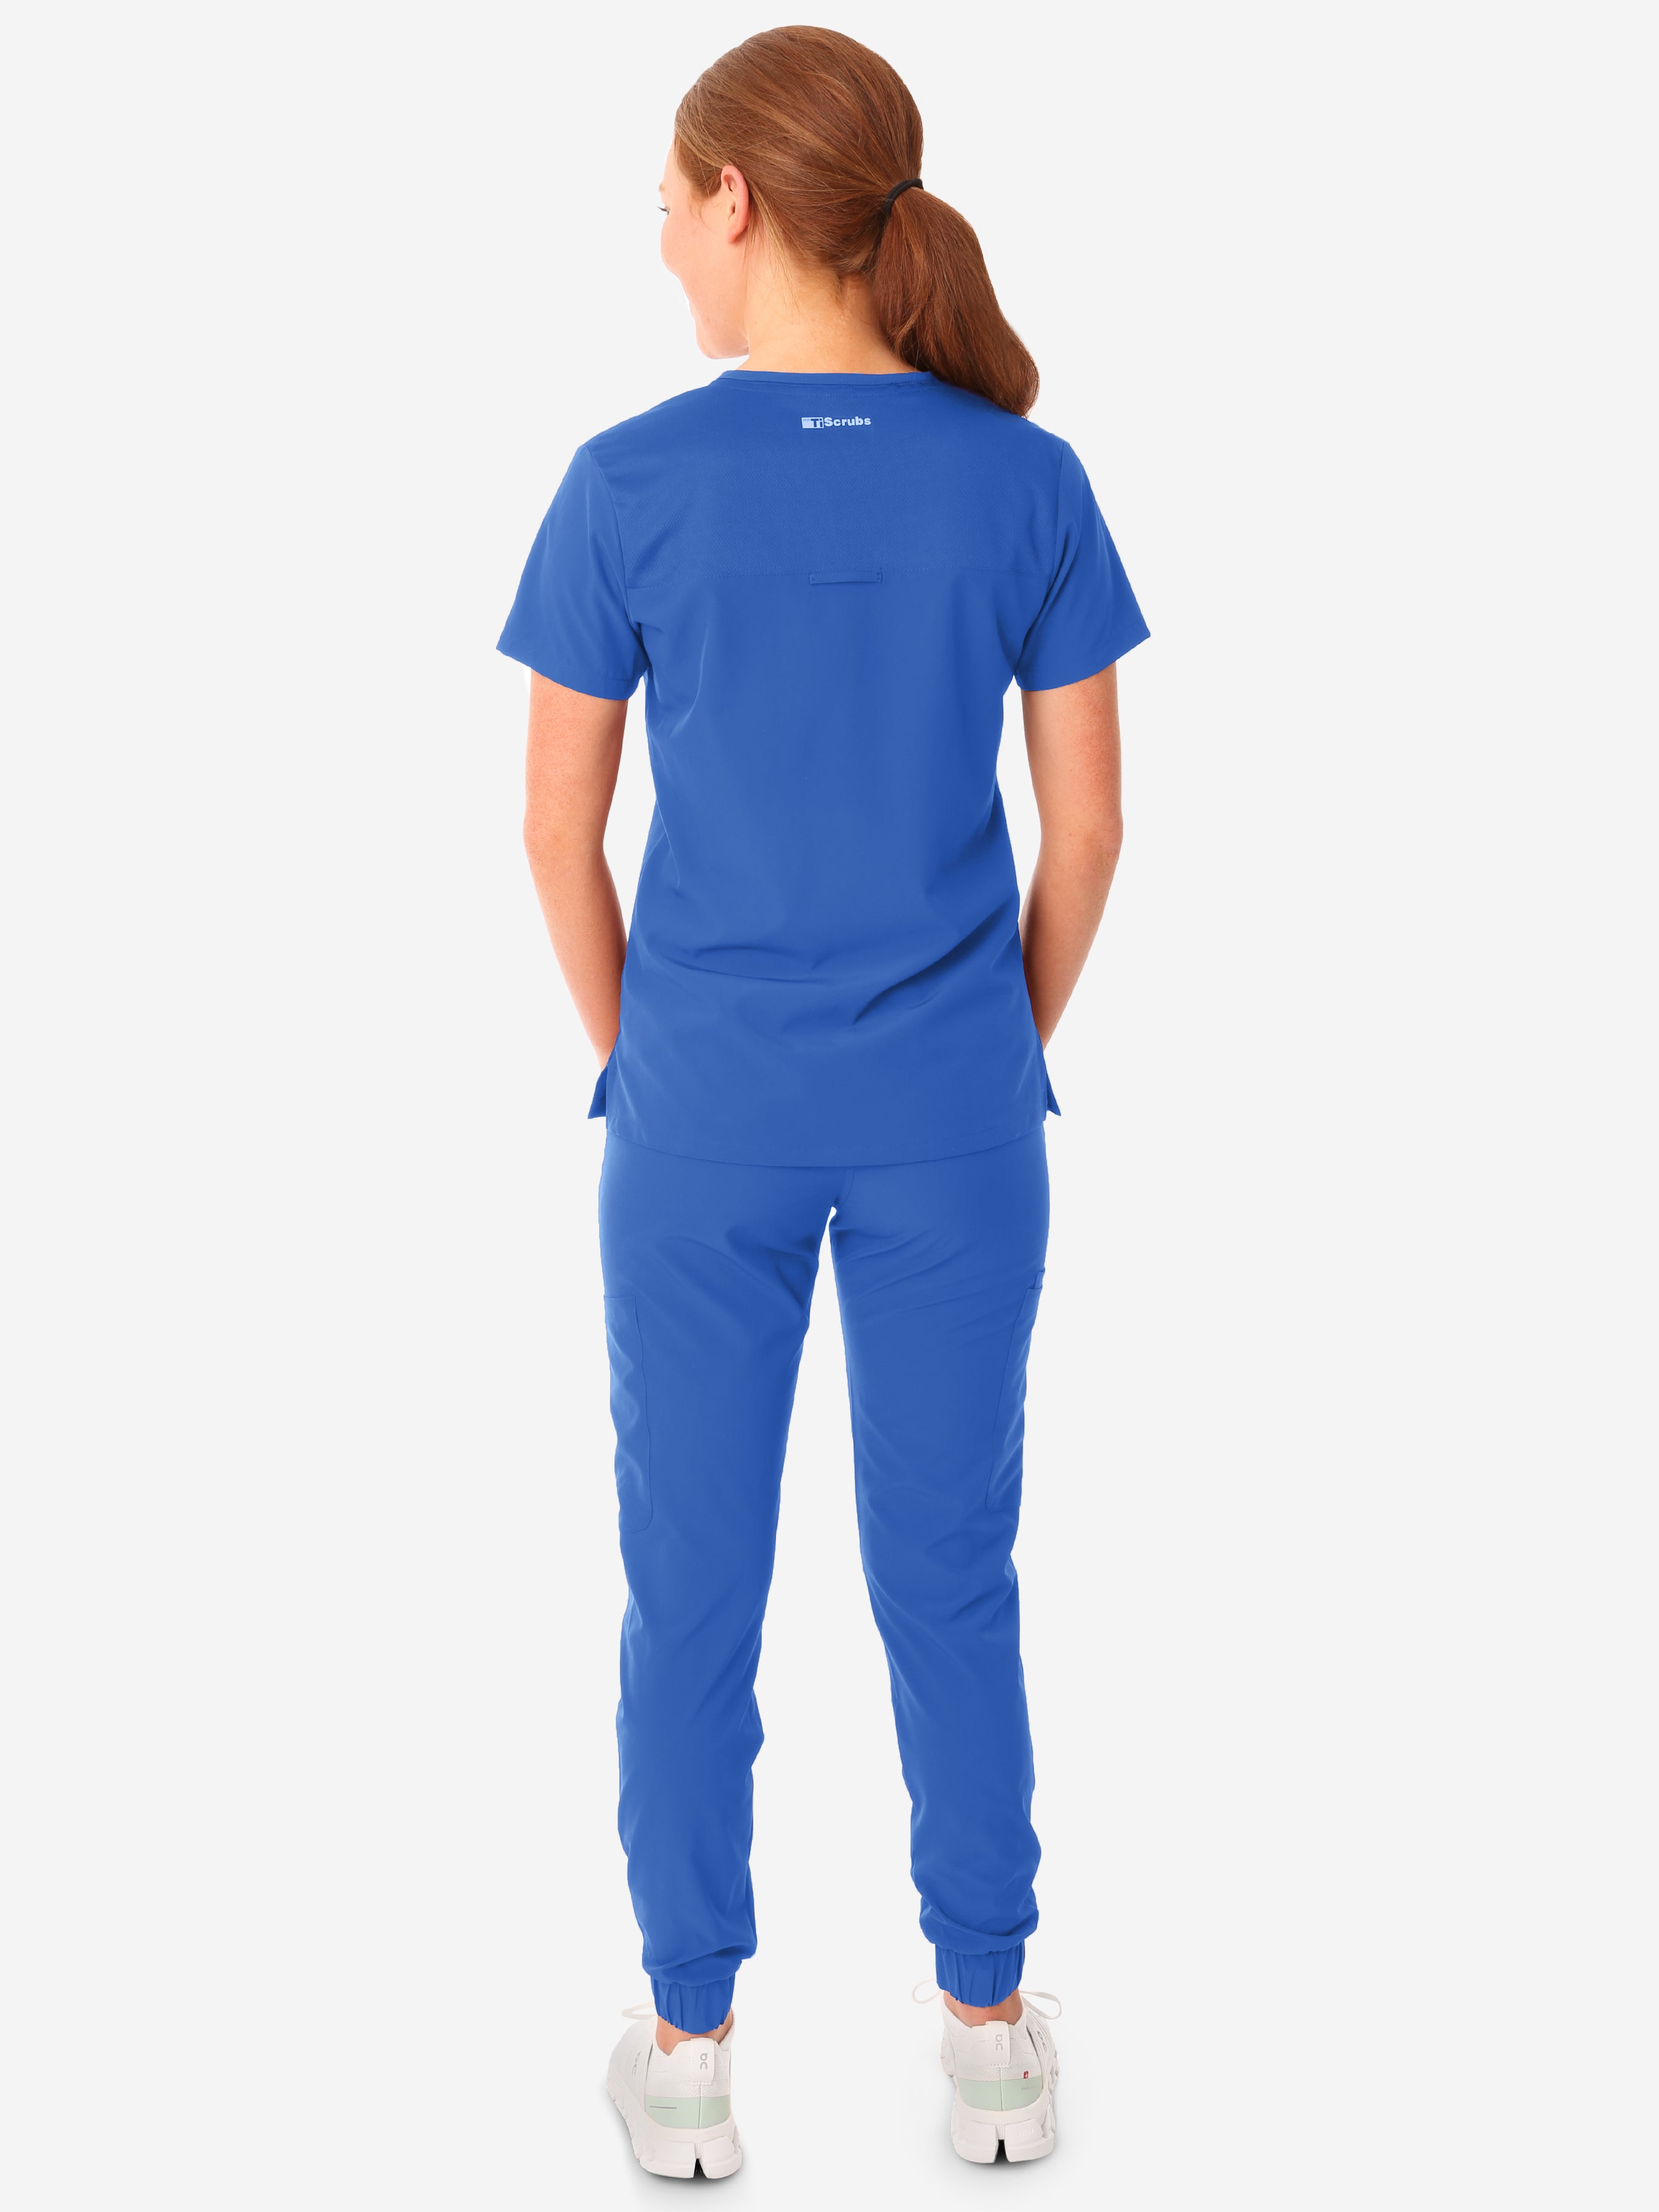 TiScrubs Women's Stretch Royal Blue One-Pocket Scrub Top Untucked with Joggers Back View Full Body